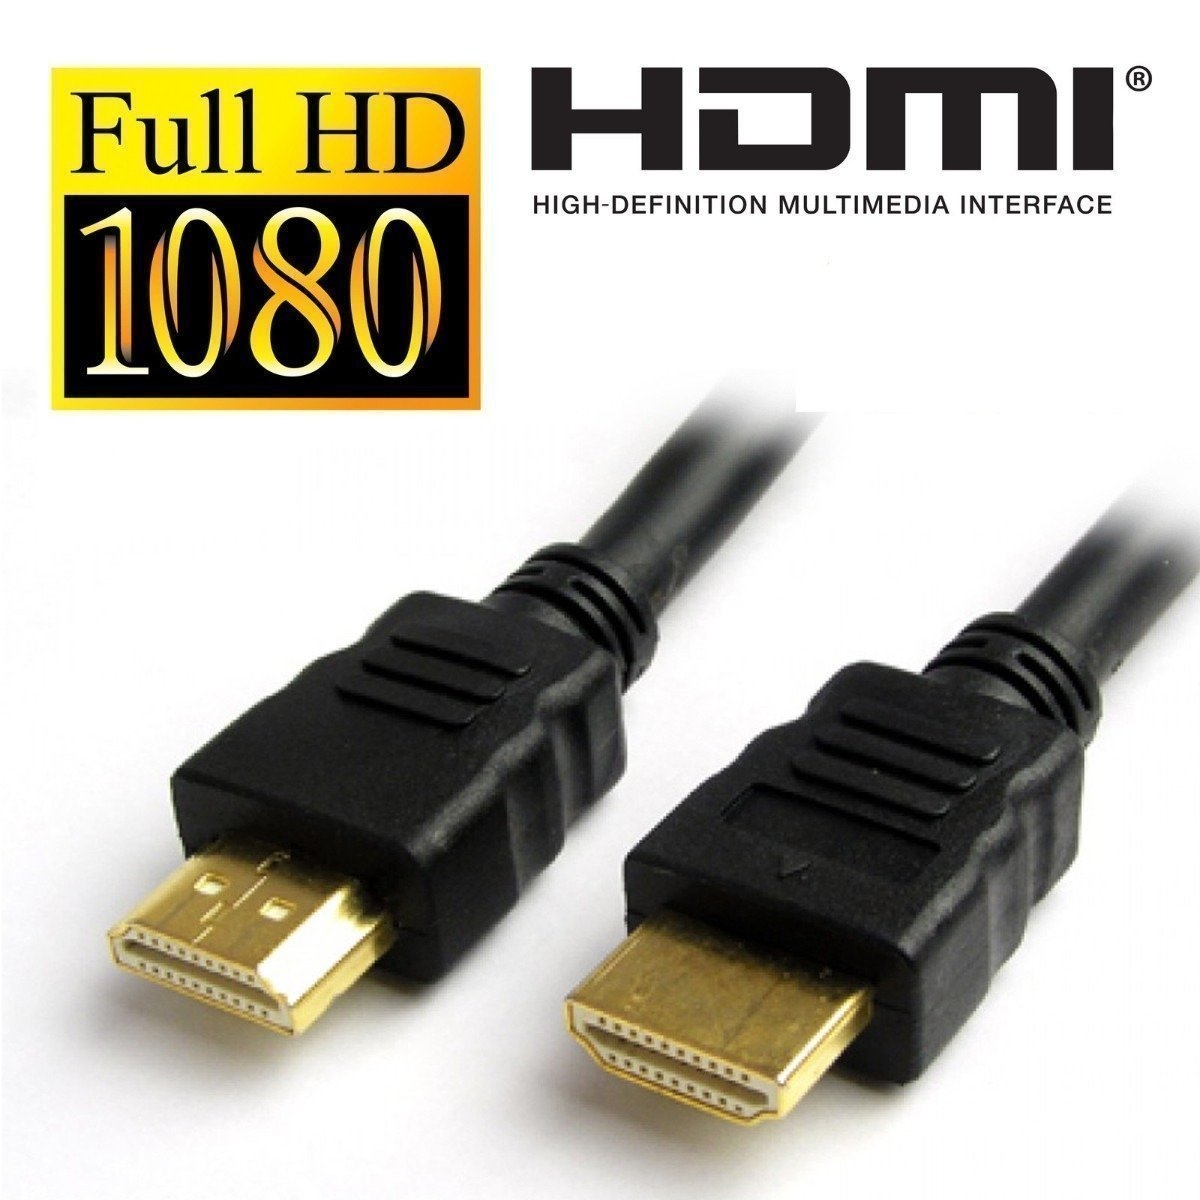 Terabyte 1080P 3D HDMI Cable for Projector, HDTV, Blu-ray Players, Xbox 360, PS3 1.5 Meter